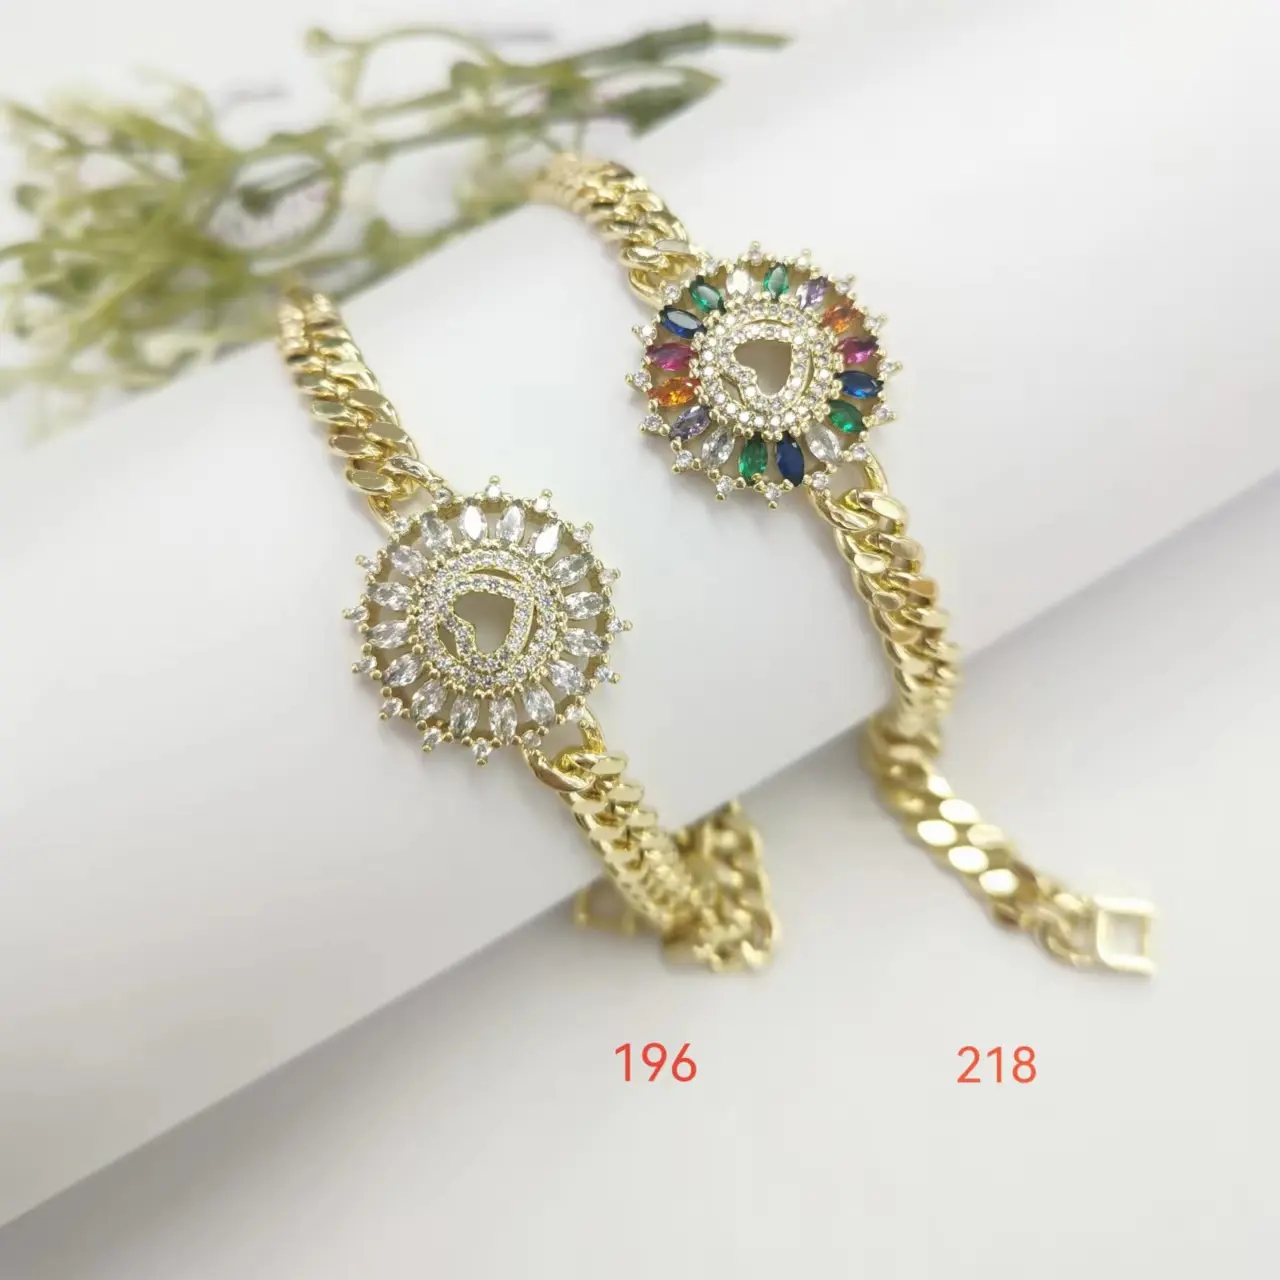 A1113 xuping jewelry Korean Popular 18k Gold Plated 14k Gold Plated Diamond Crystal Exquisite Couple Bracelet